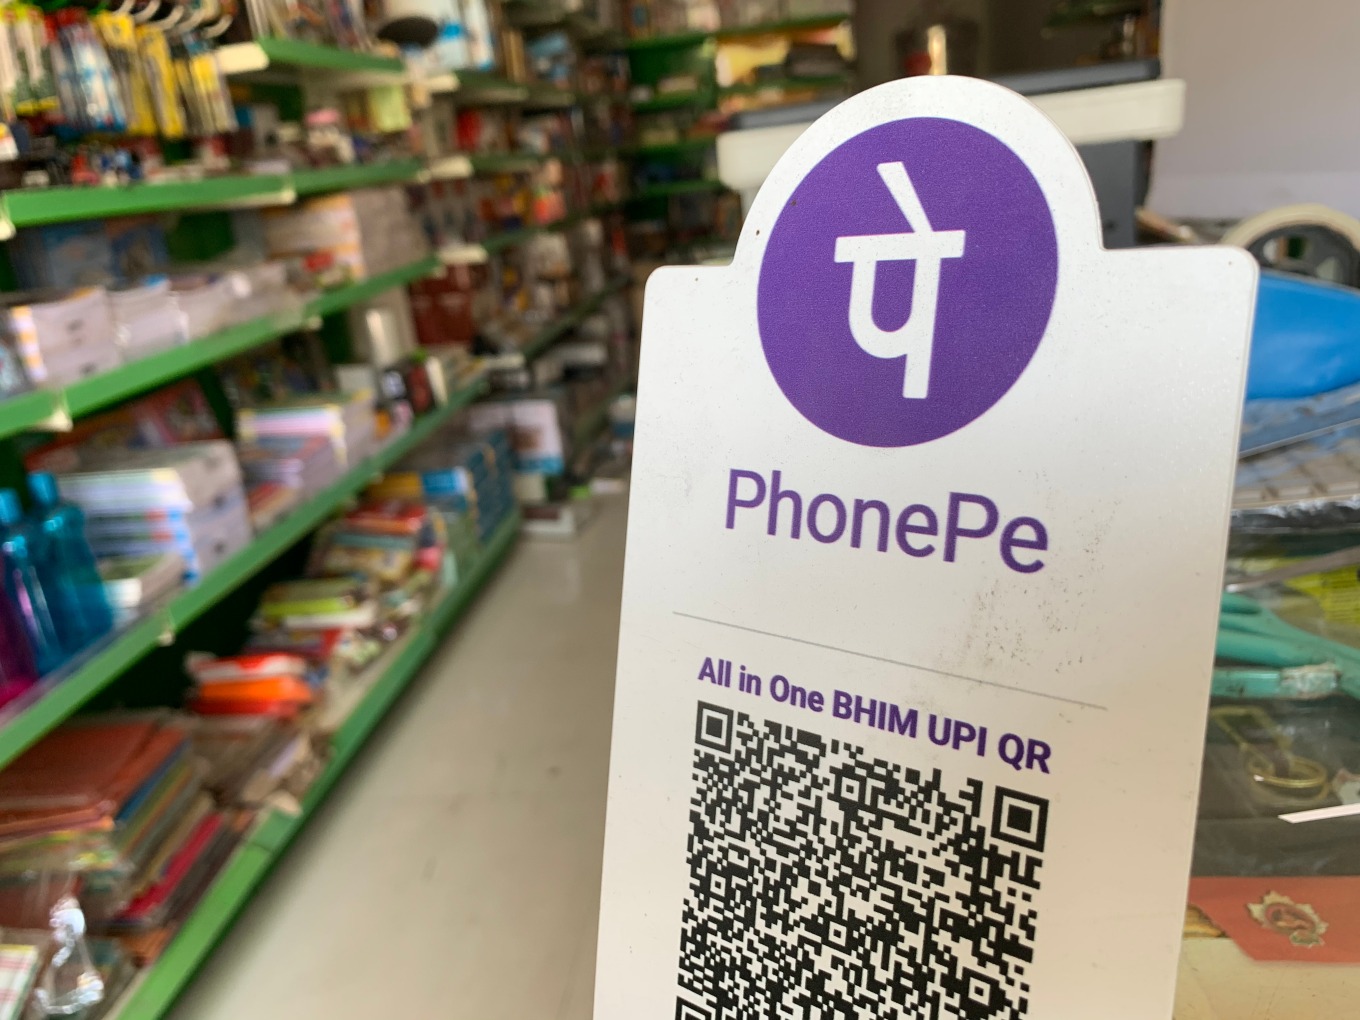 PhonePe to Launch its Own Payment Gateway - Equitypandit